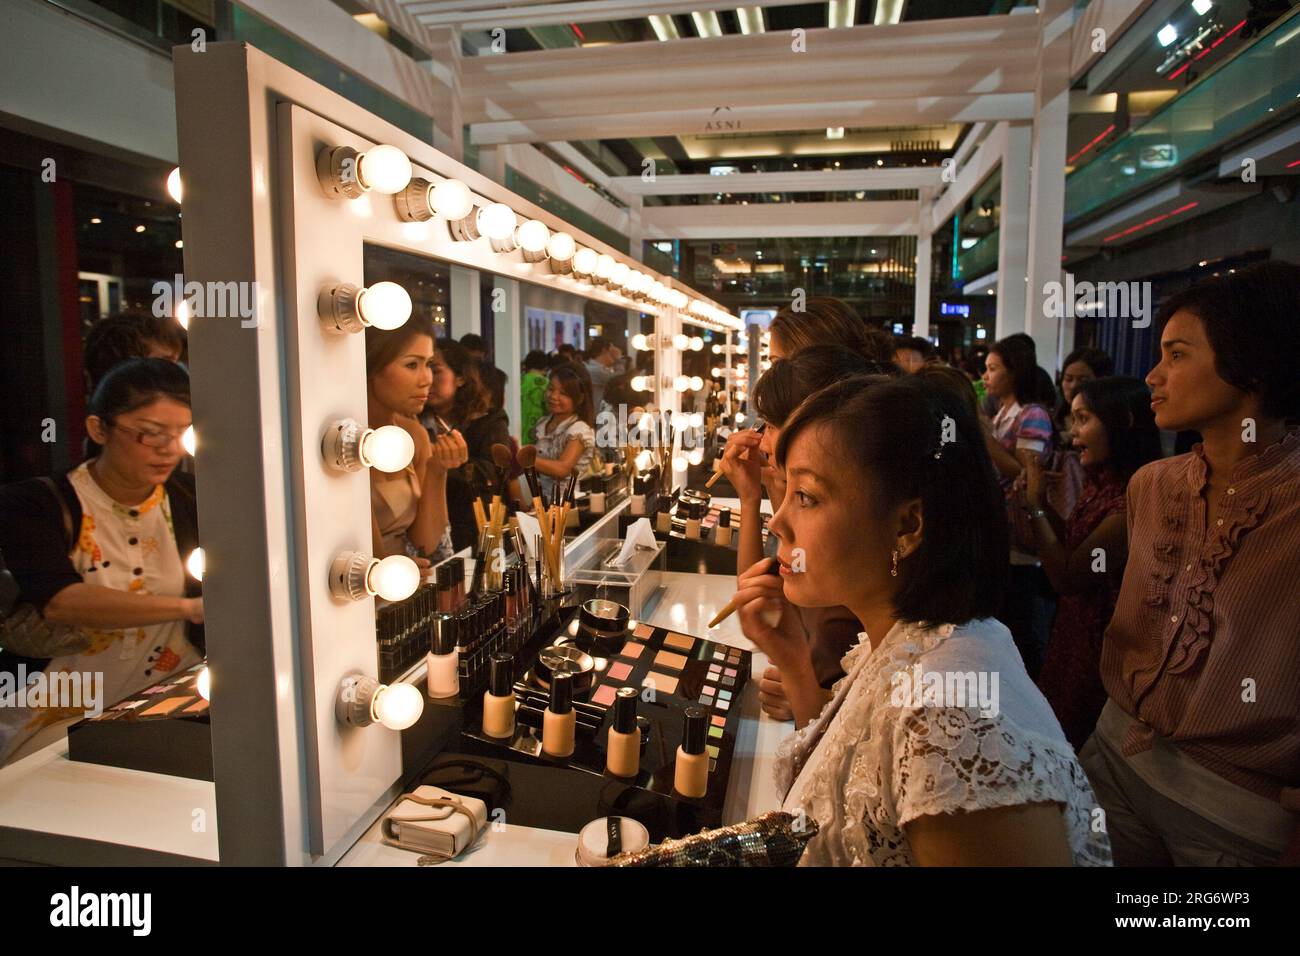 BANGKOK, THAILAND - May 11: cosmetic company AMWAY sponsores a makeup course with its products in the central world center and assists woman in using Stock Photo